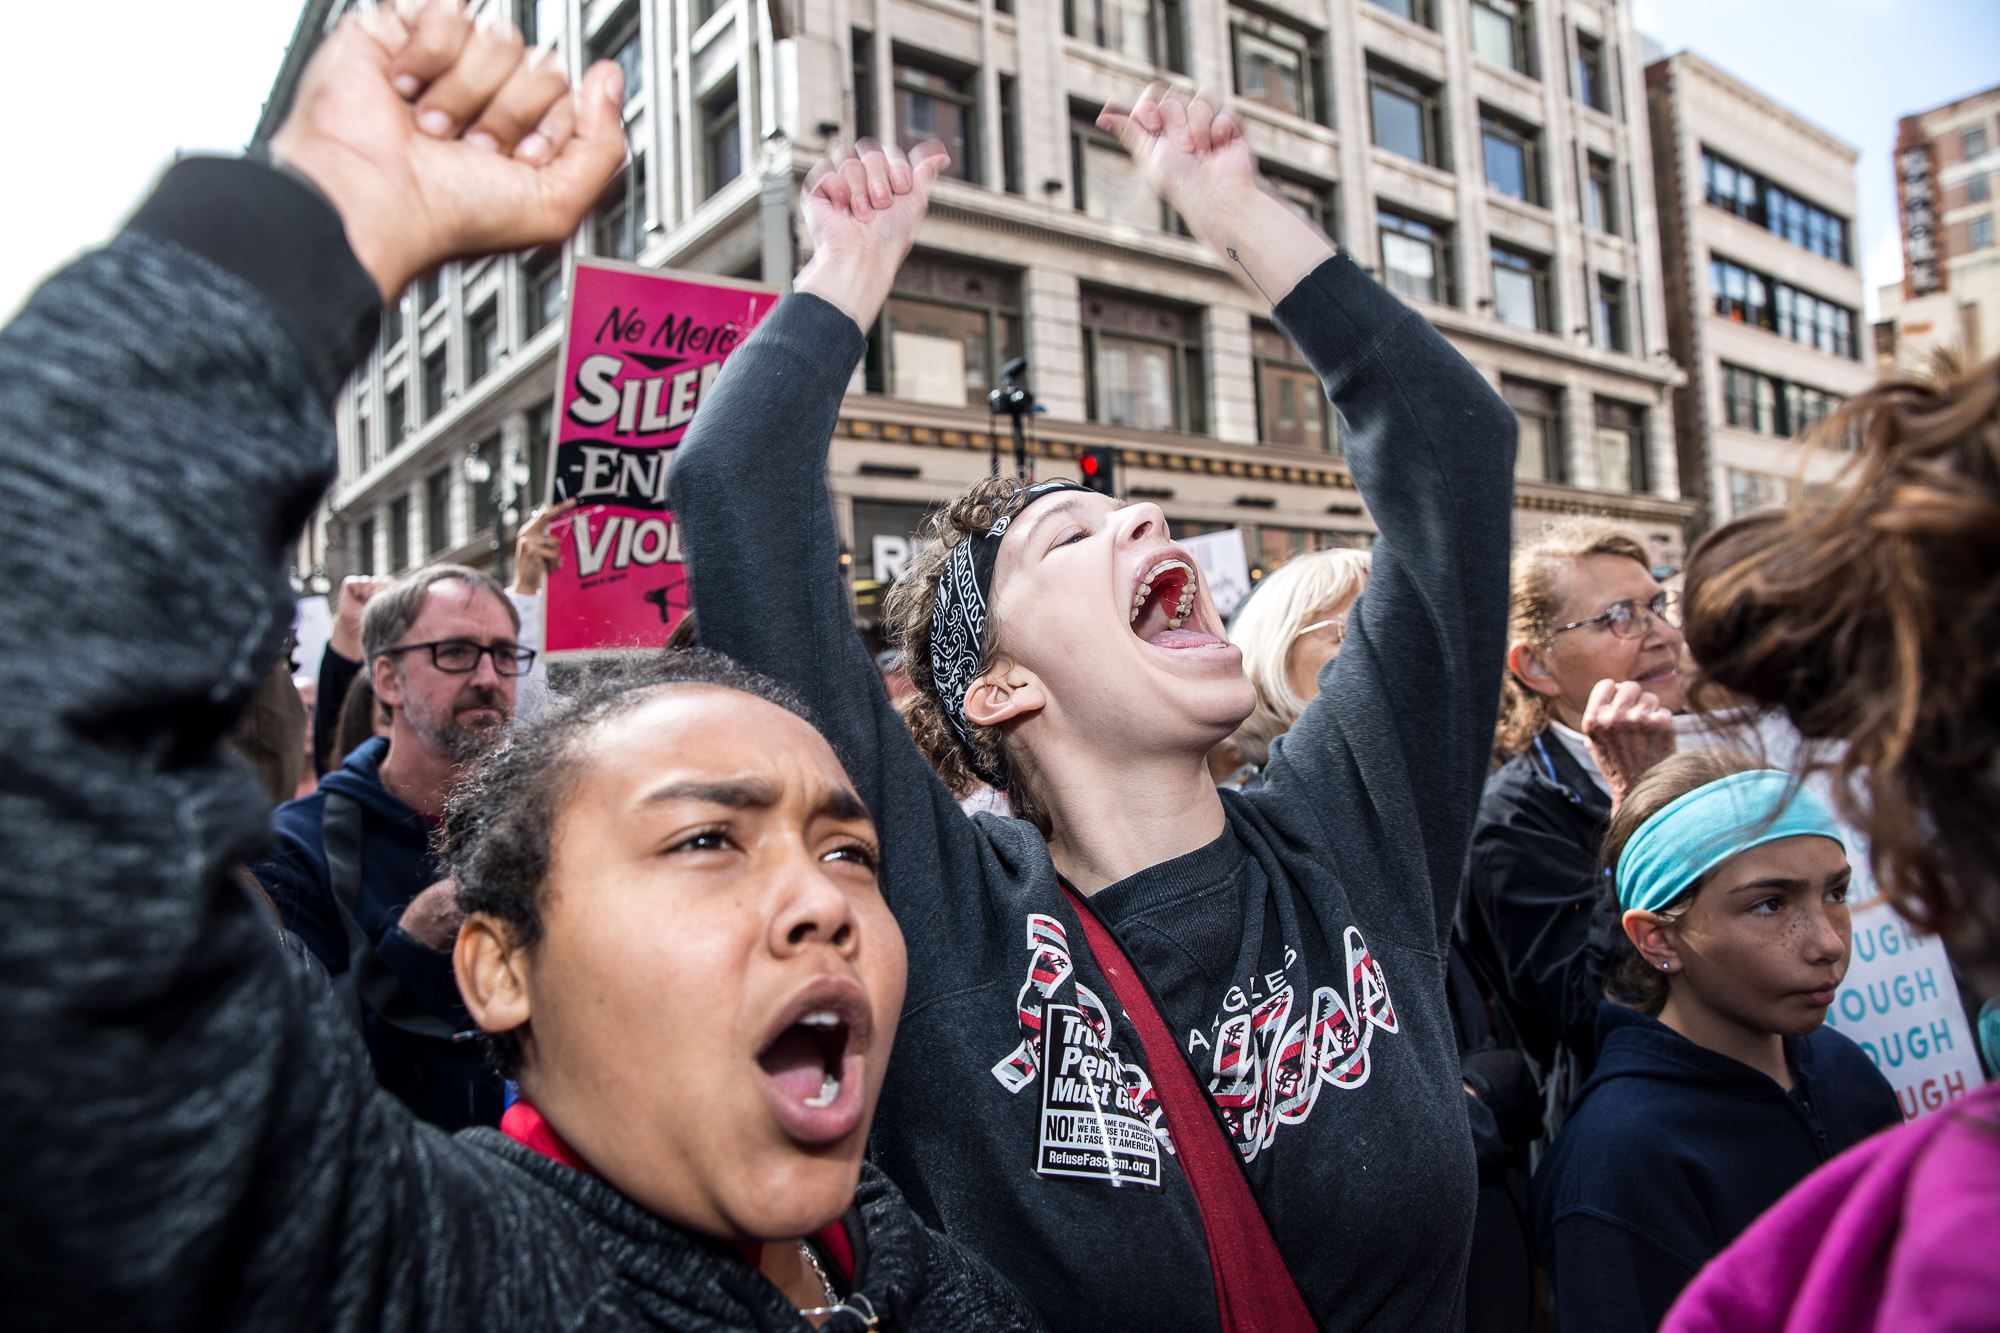  Alex Garcia (left) and Avery Dehart (right) cheer and shout with enthusiasm as they listen to guest speakers give their opinion on the lack of gun regulation in the U.S before protestors began their march toward city hall in downtown Los Angeles, Ca